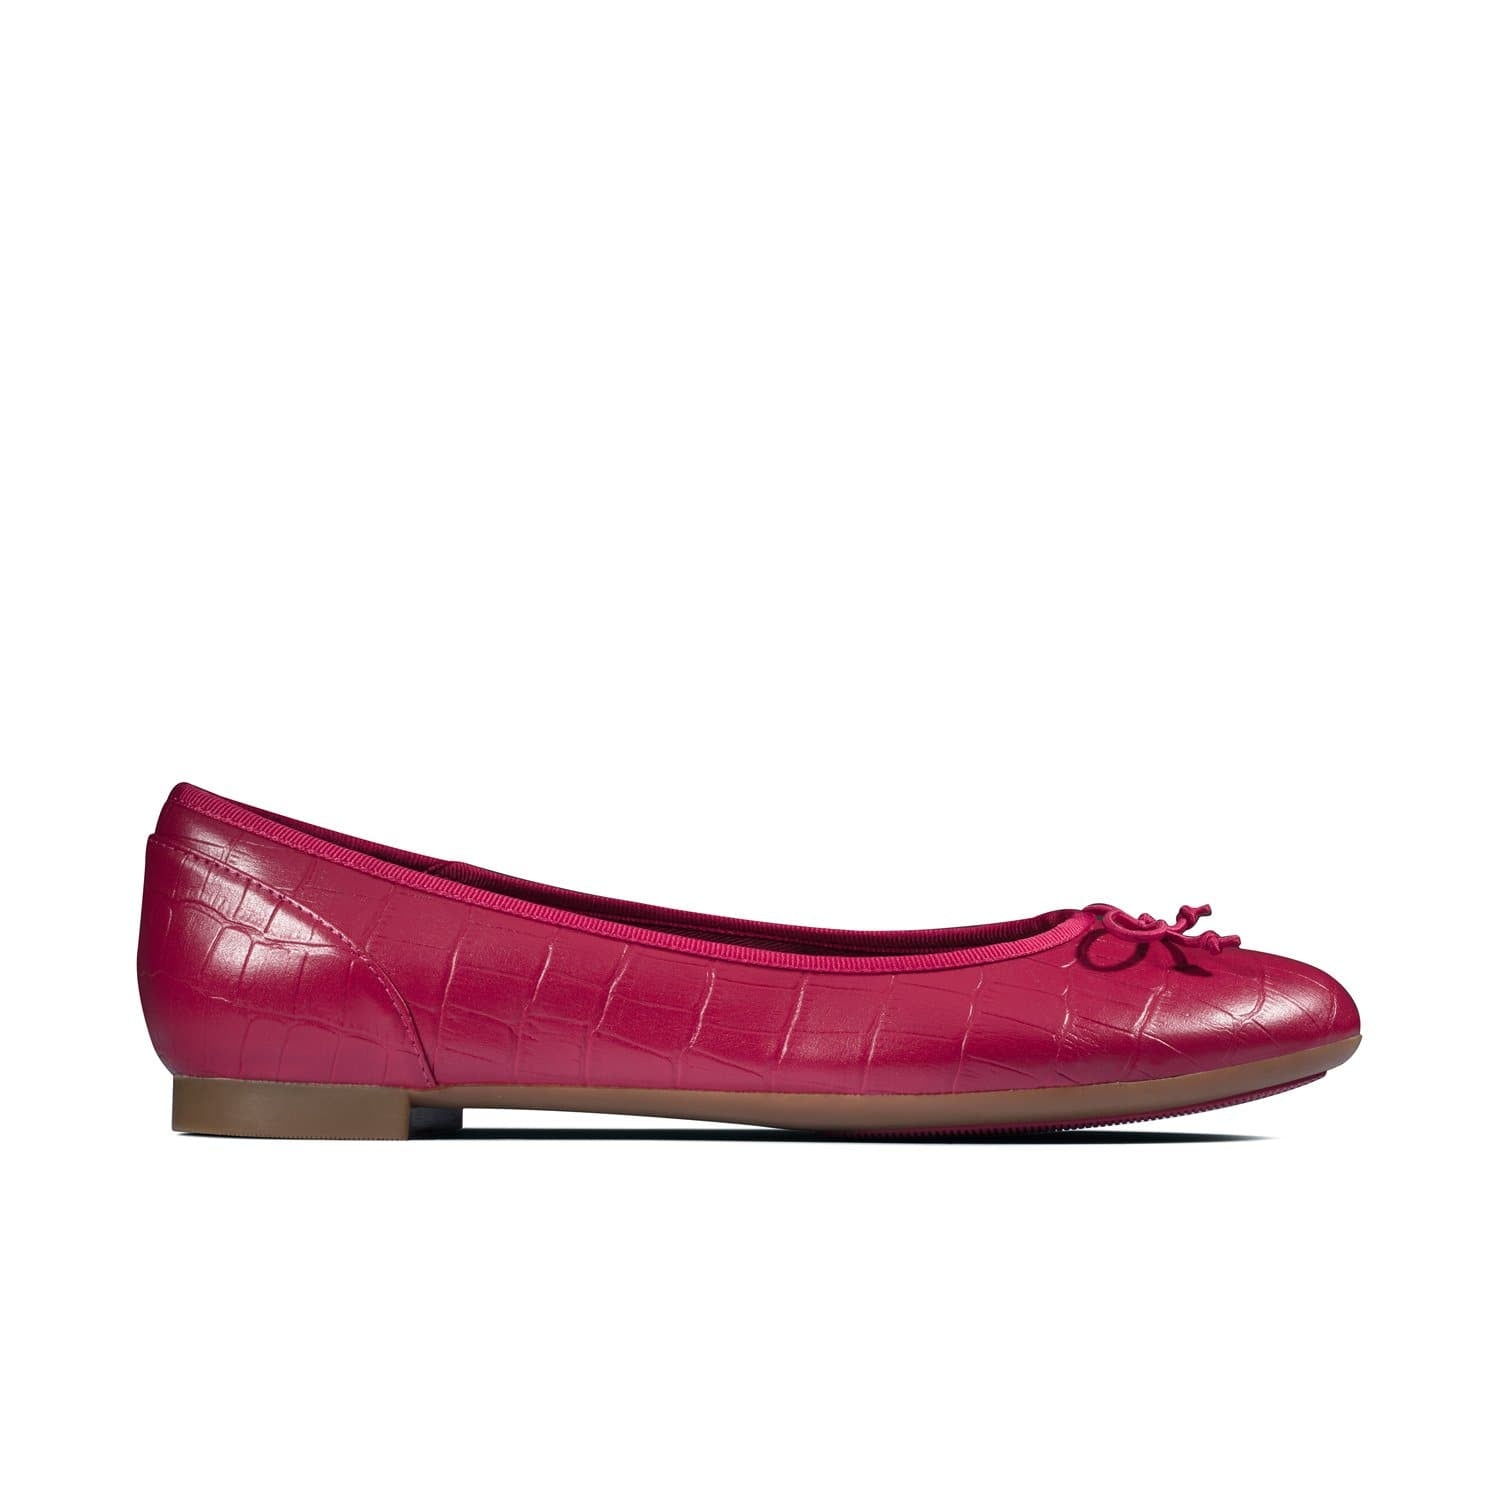 Clarks-Couture-Bloom-Women's-Shoes-Fuchsia-26150282